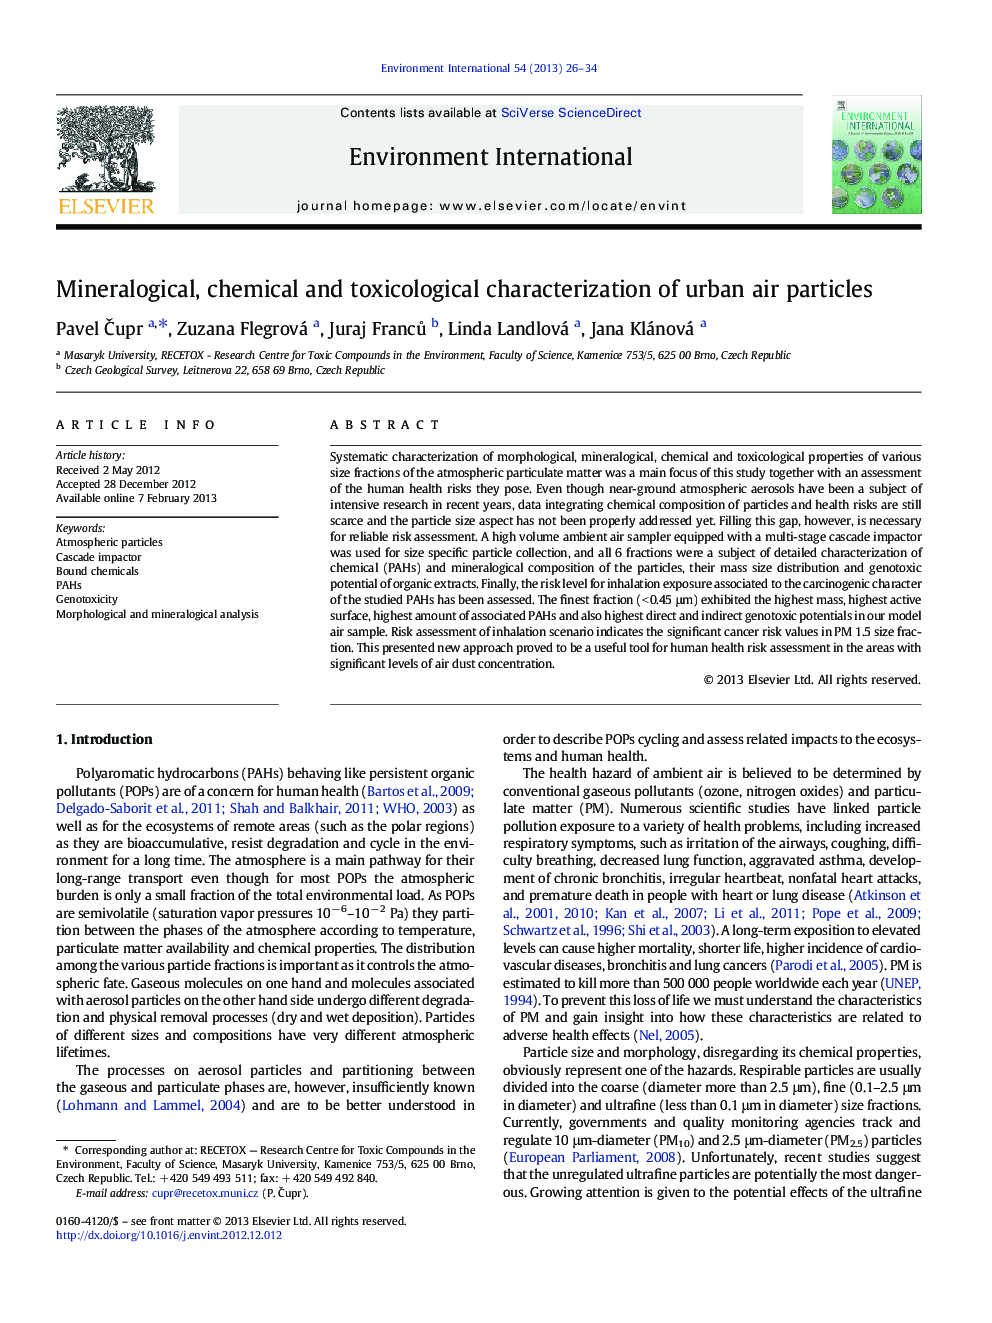 Mineralogical, chemical and toxicological characterization of urban air particles